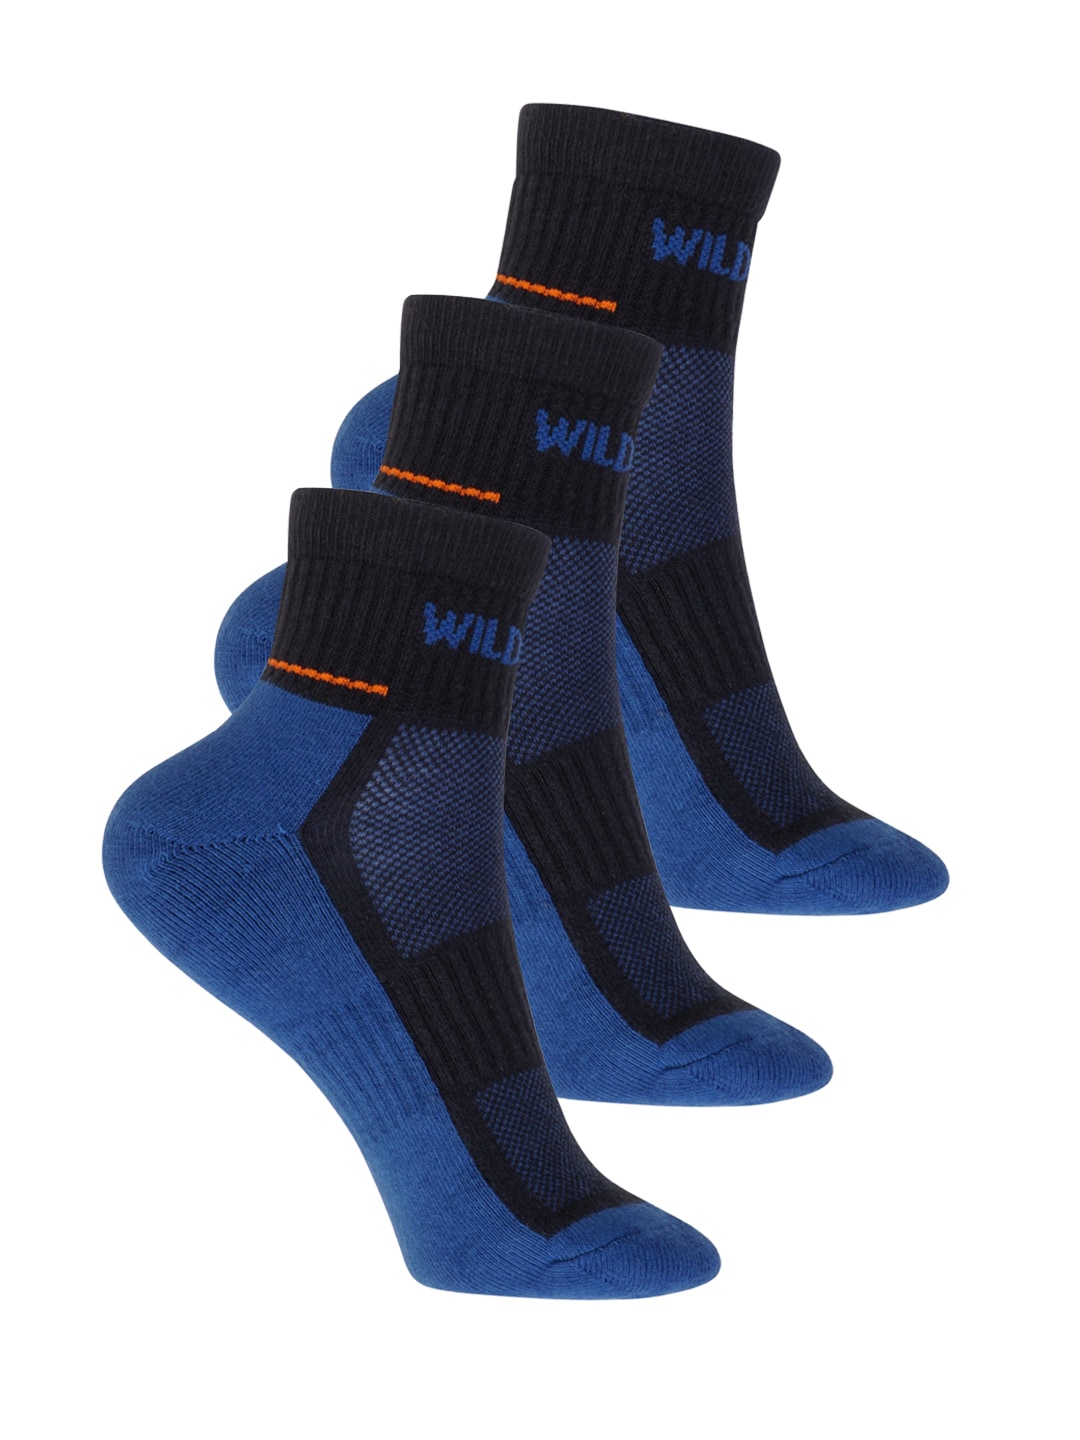 Wildcraft Adults Navy Blue Pack of 3 Colourblocked Above Ankle Socks Price in India